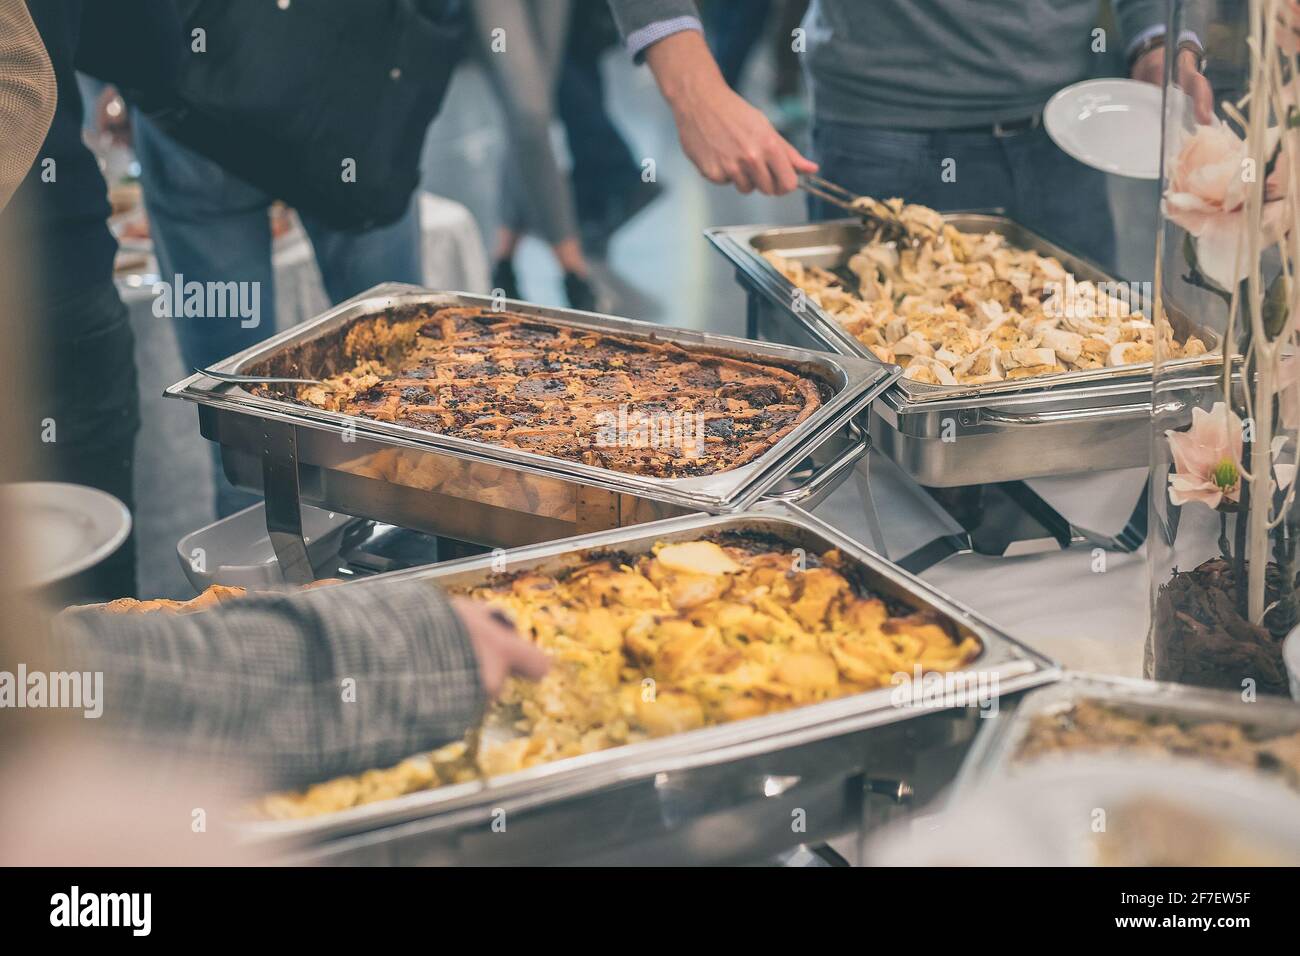 Hands of people seen taking food out of stainless steel containers at a  buffet or catering gala event. Tasty food being served on a catering event  Stock Photo - Alamy